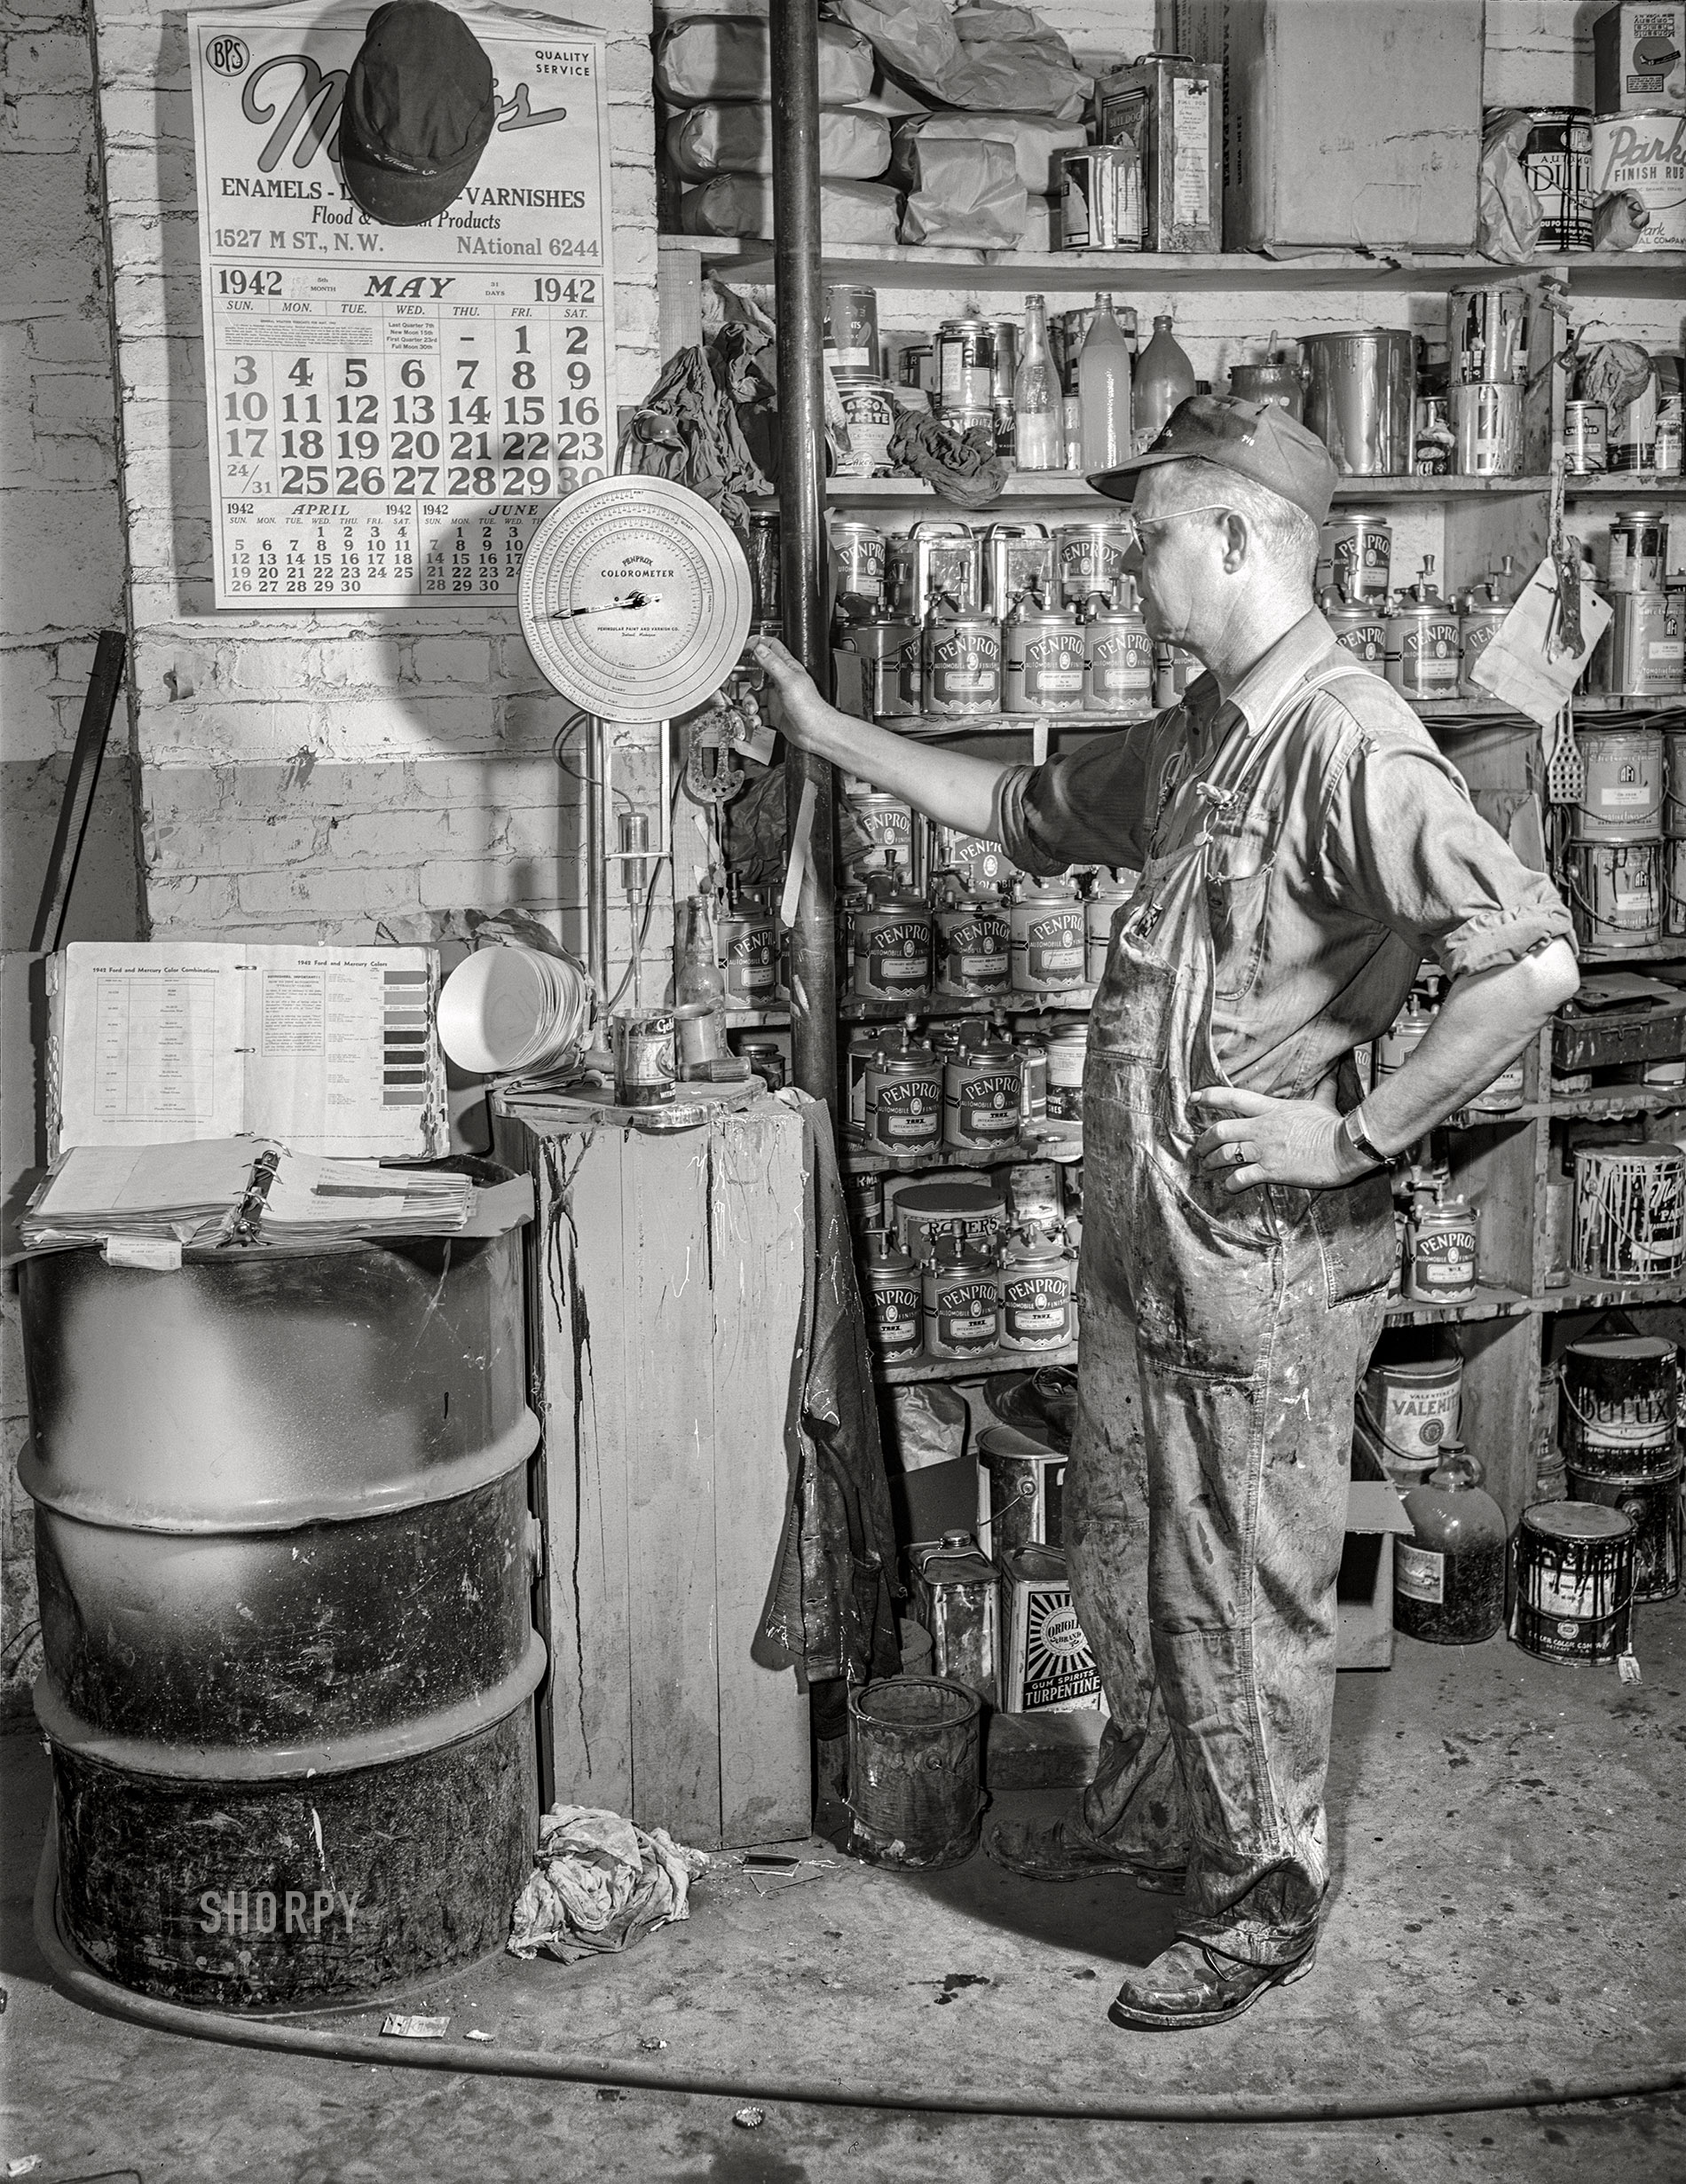 May 1942. "Arlington, Virginia. Auto refinishing plant. Mechanical paint mixer." 4x5 inch acetate negative by John Collier for the Office of War Information. View full size.